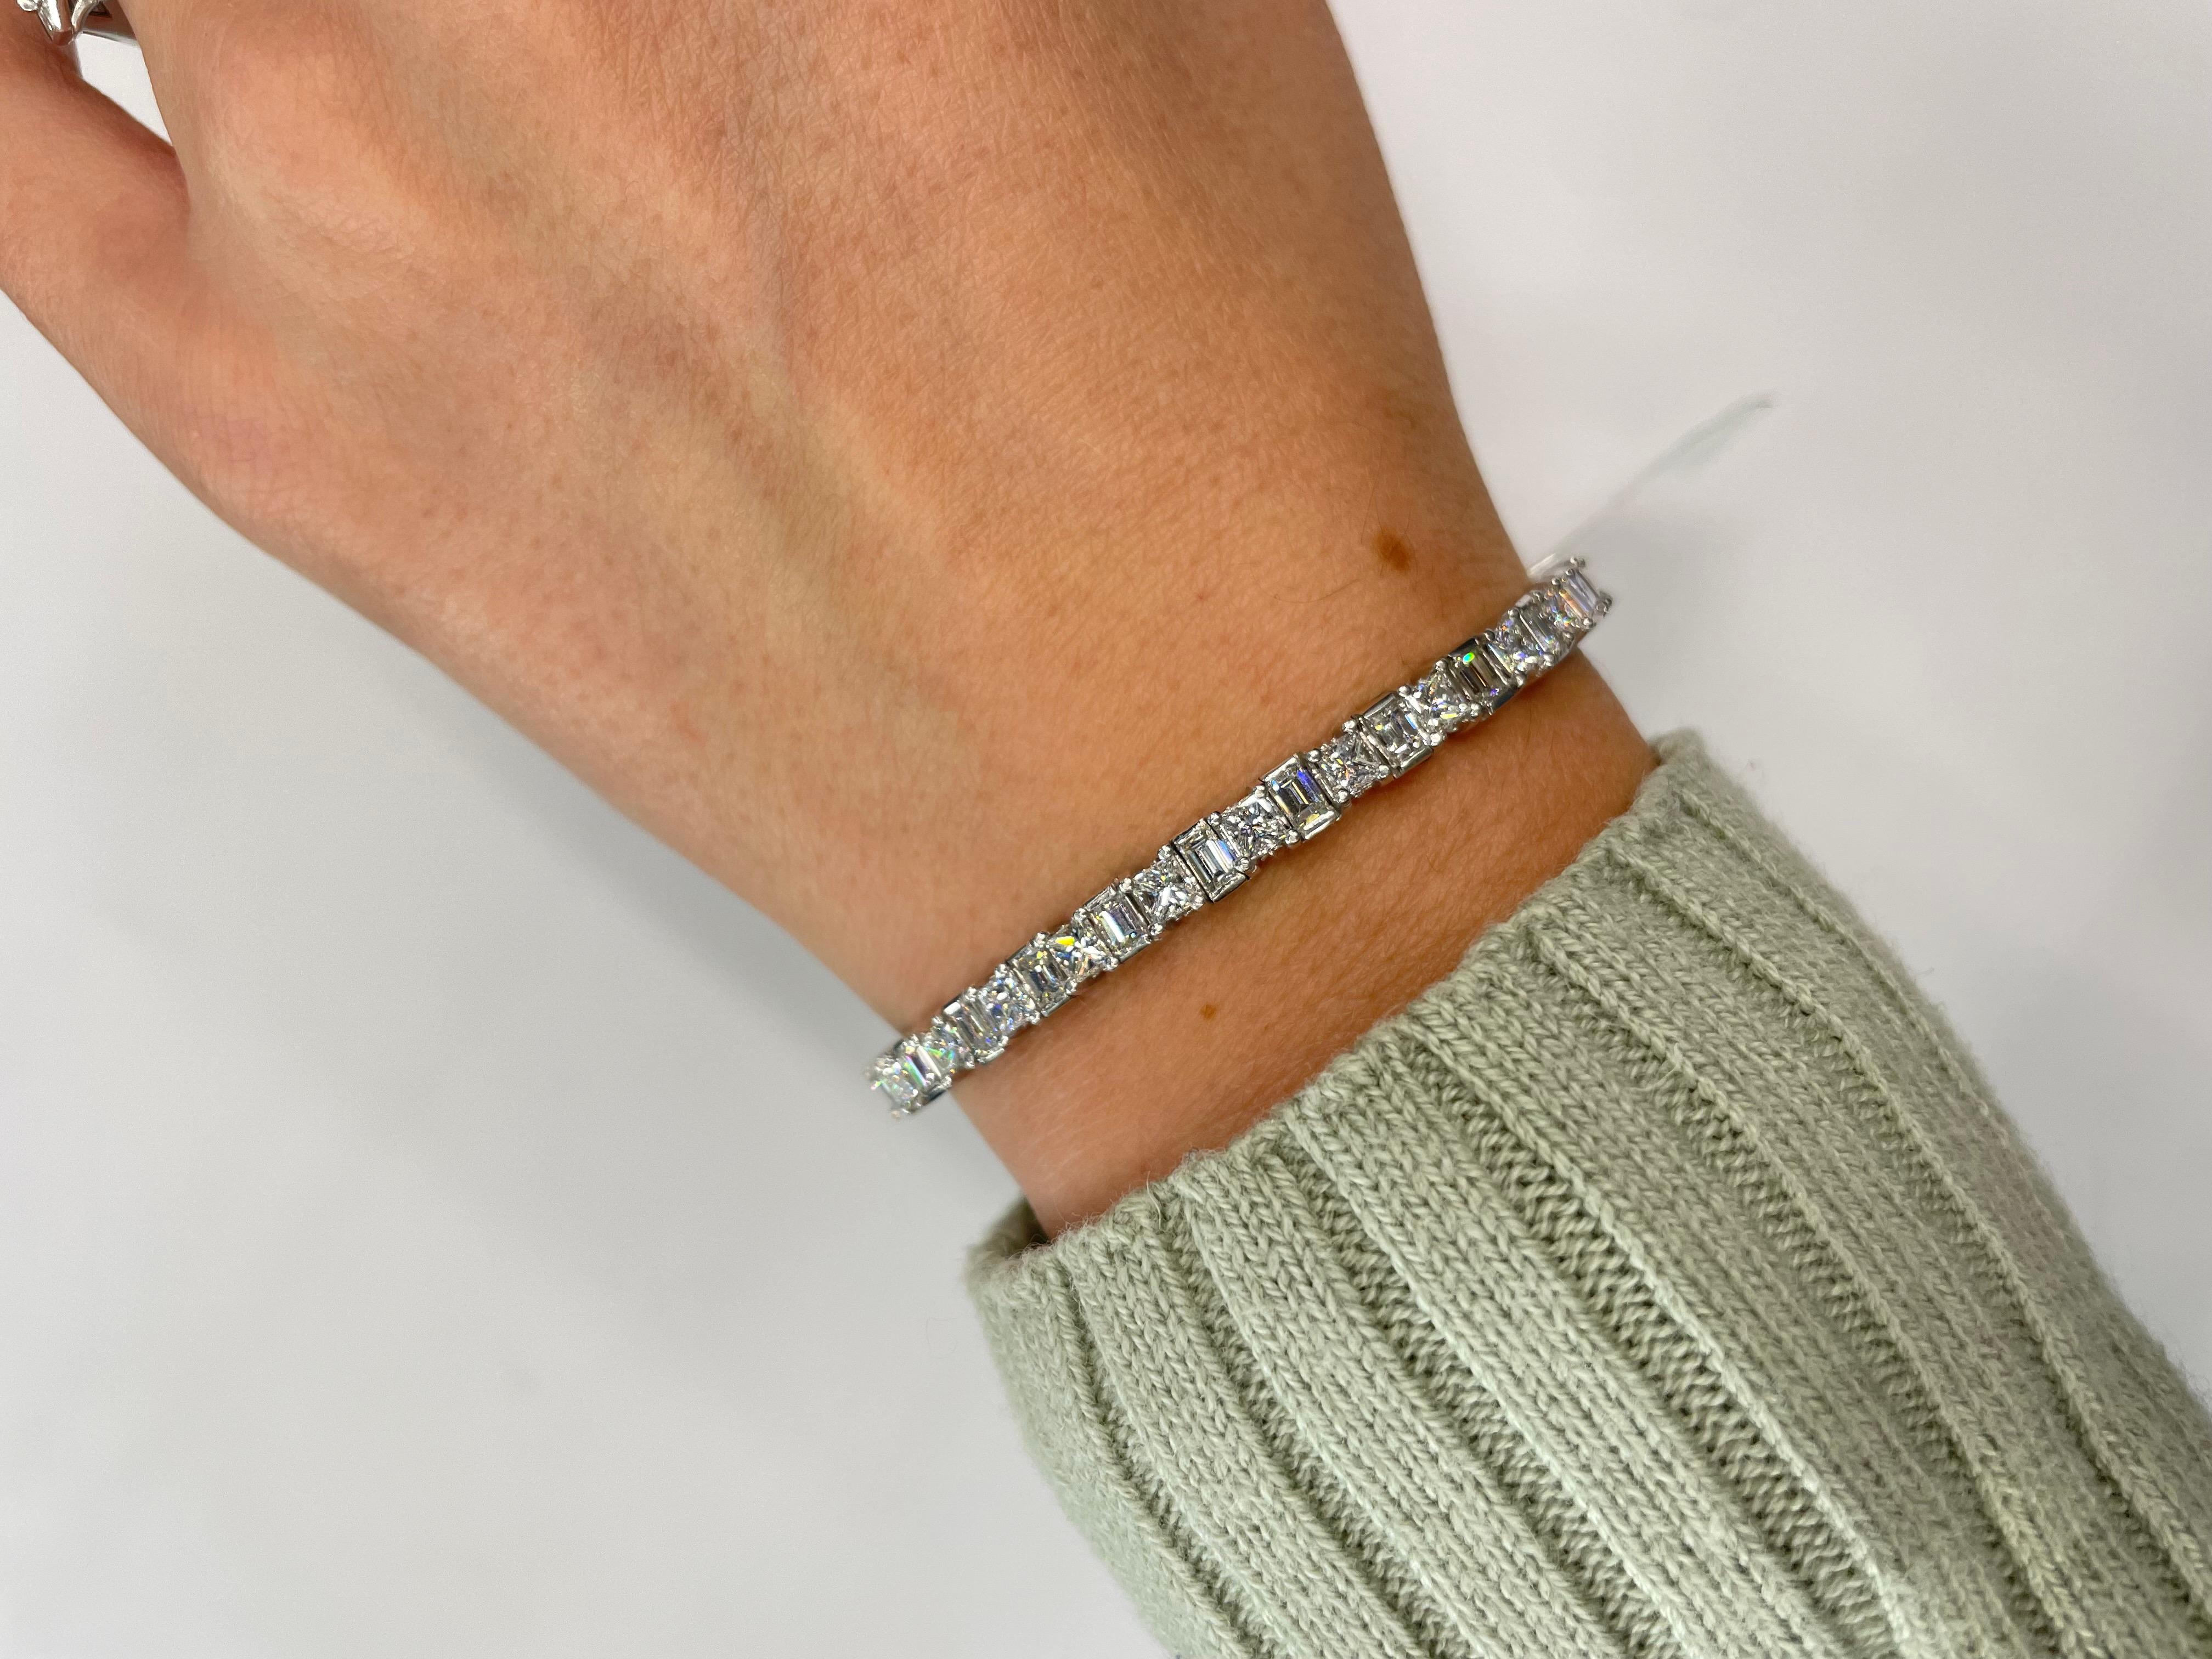 This is a beautiful Platinum 12 Carat Diamond One Line Tennis Princess And Emerald Cut Bracelet.
Crafted in platinum mounted with brilliant and step-cut diamonds of exceptional quality. Brilliant and vibrant this bracelet will leave everyone